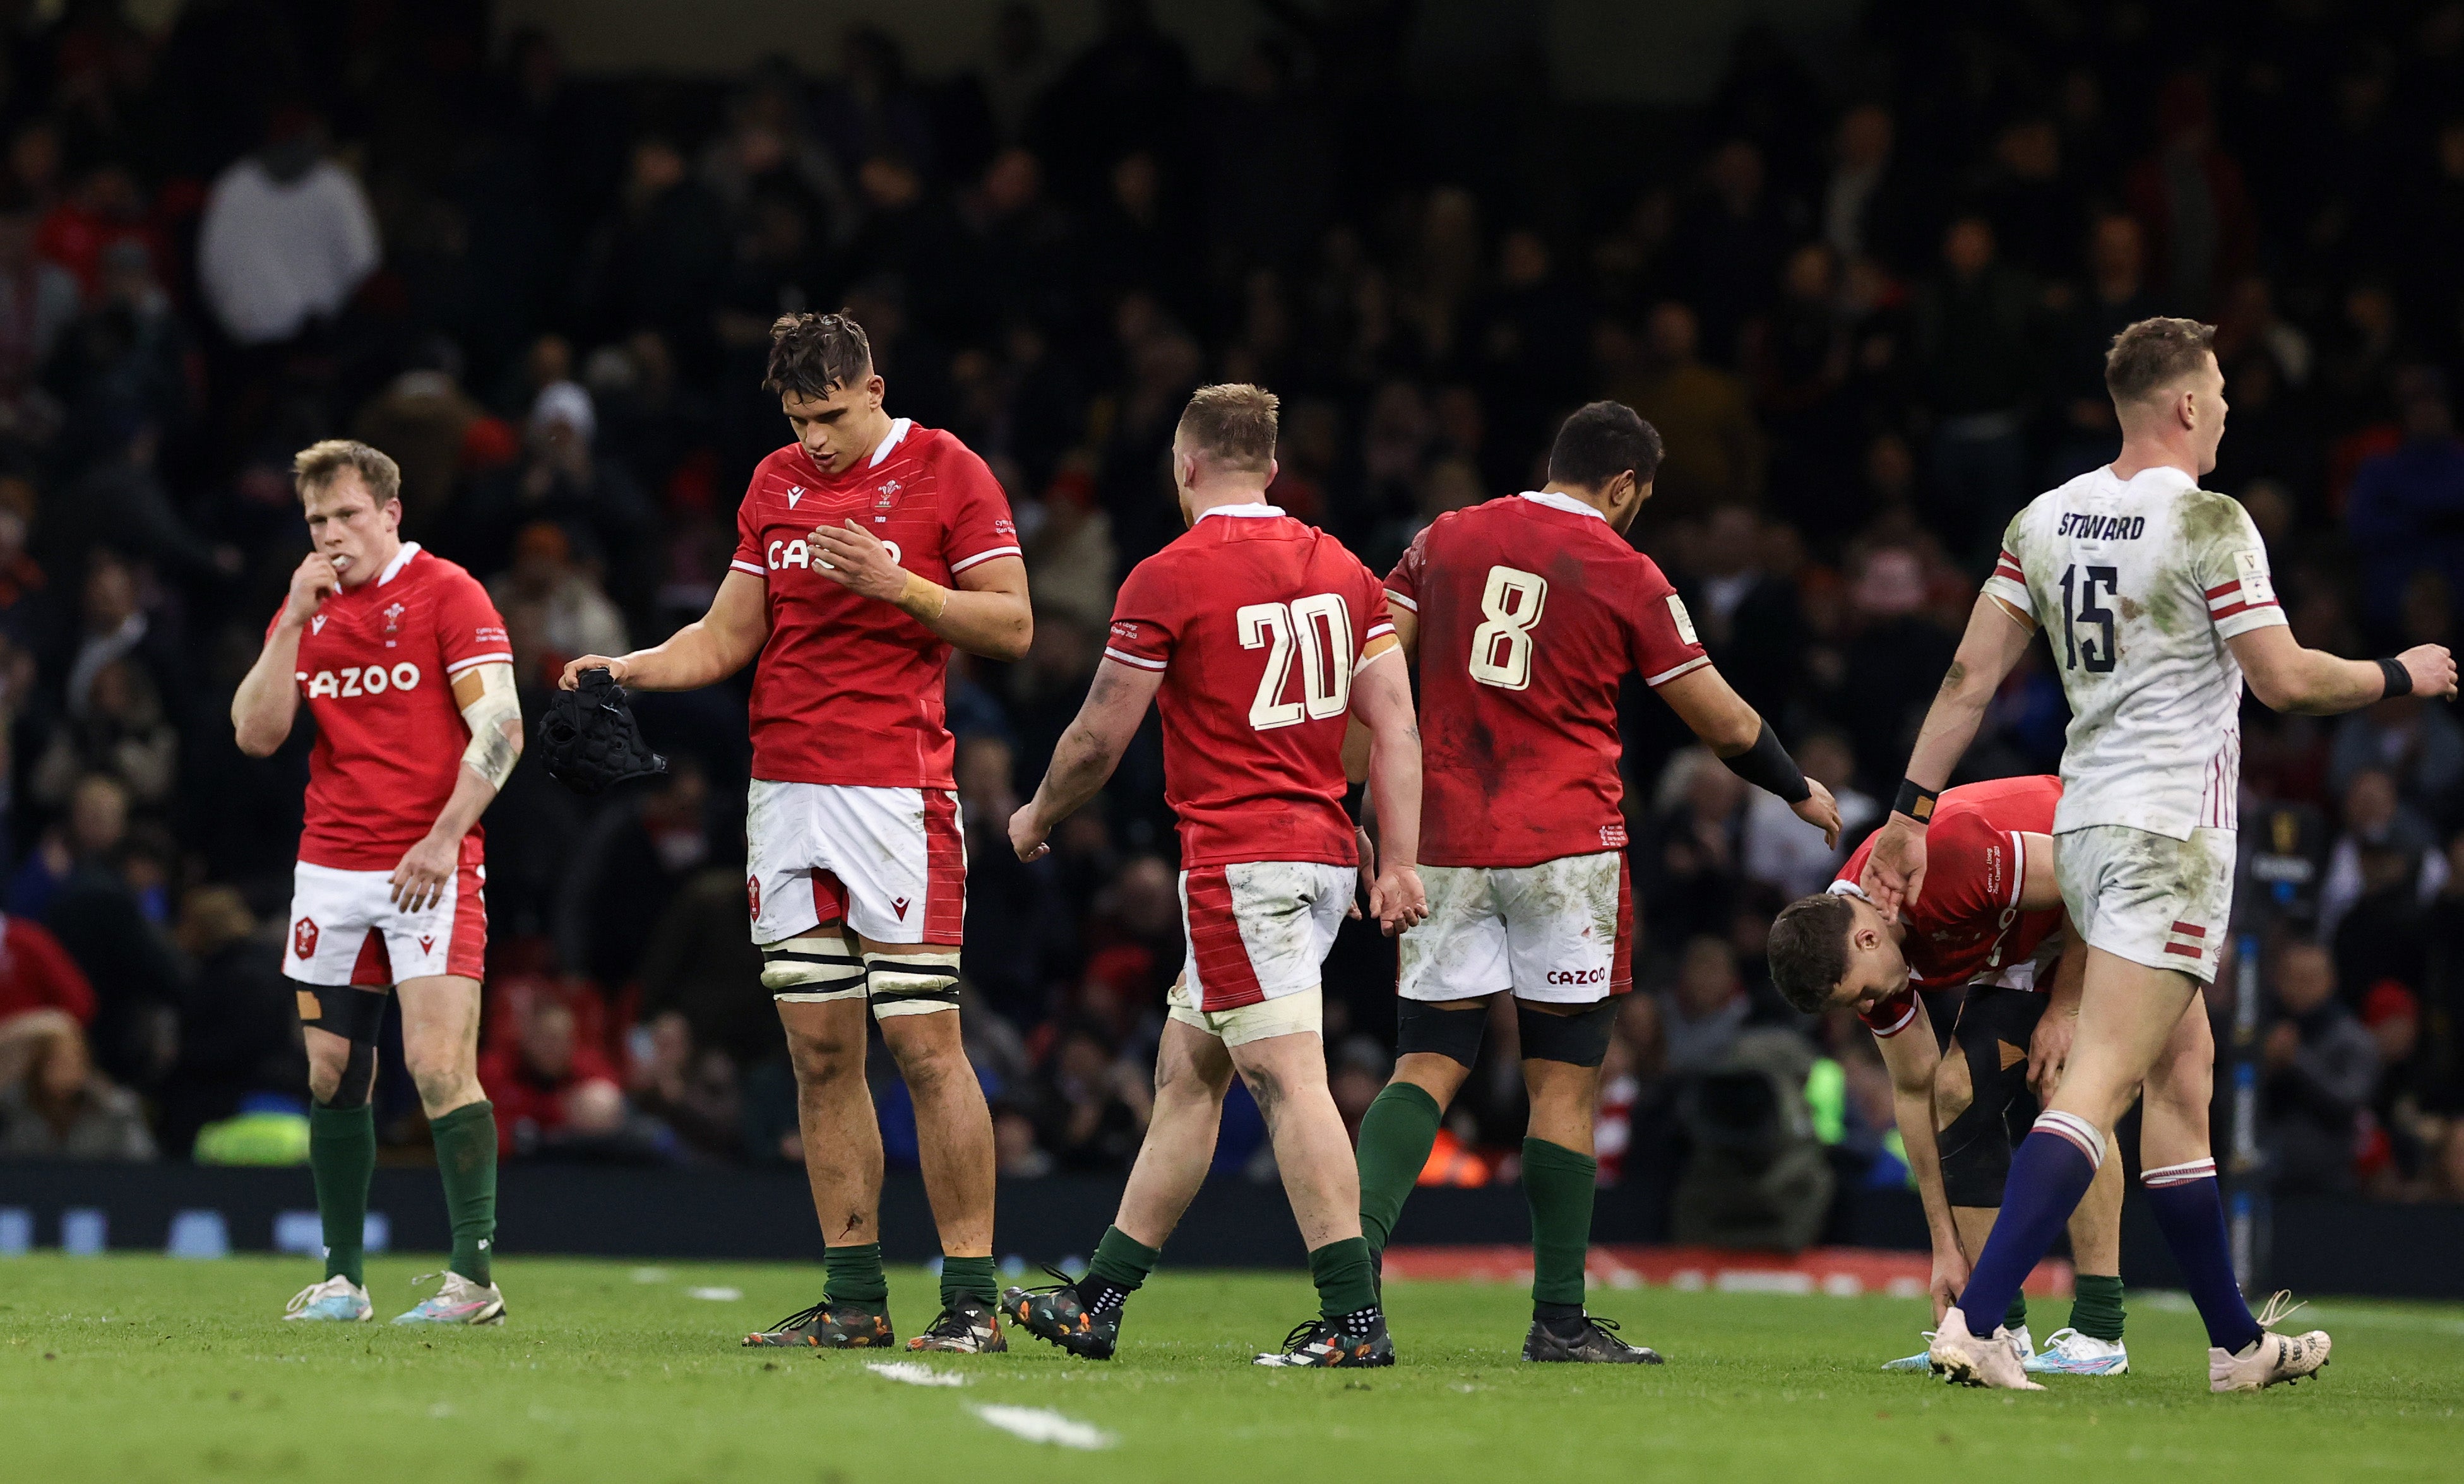 Wales suffered a disheartening defeat